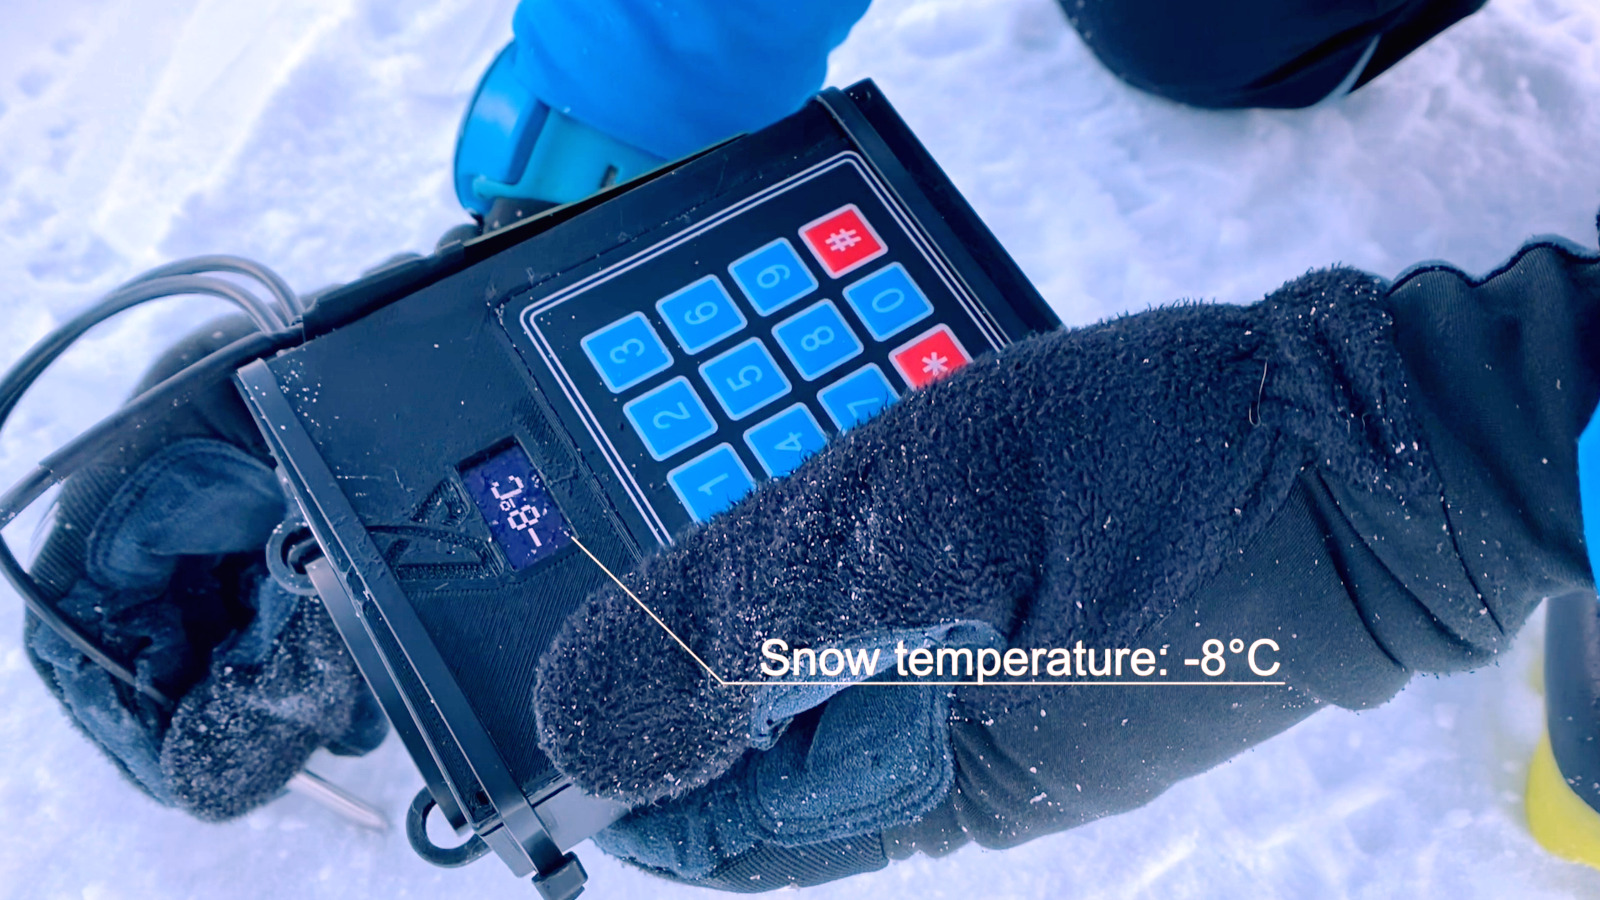 Photo of the ski and snow scanner measuring the snow temperature